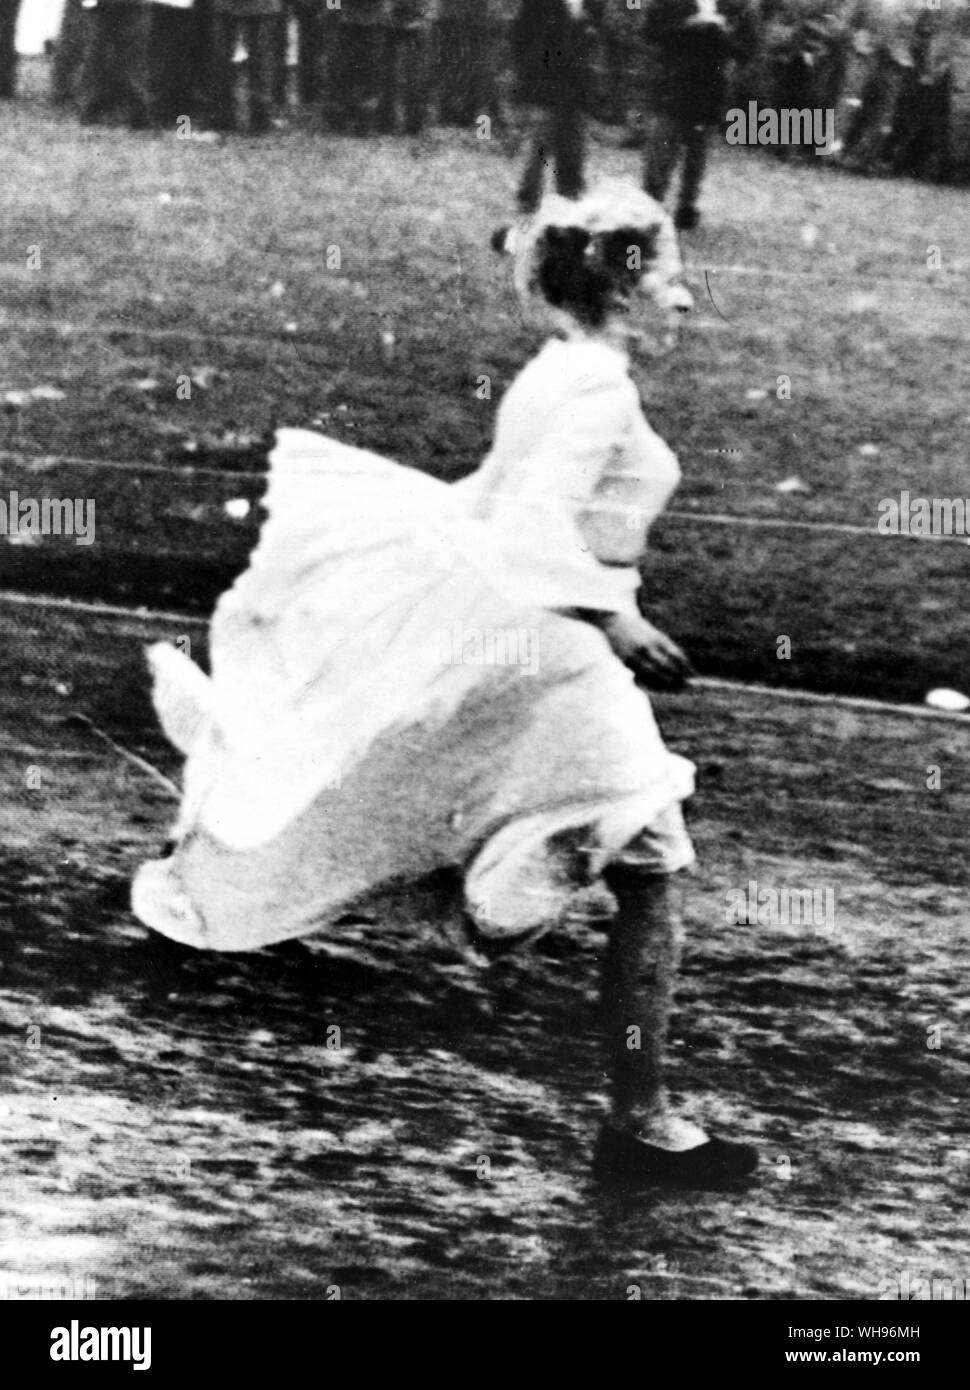 Finland,Helsinki/ Olympics,1952: Barbara Pleyer runs towards the podium in an attempt to take the Olympic oath during the opening ceremony. She was a student and had tried to get an audience with the President of Finland. She was escorted from the podium before she say two sentences! Stock Photo